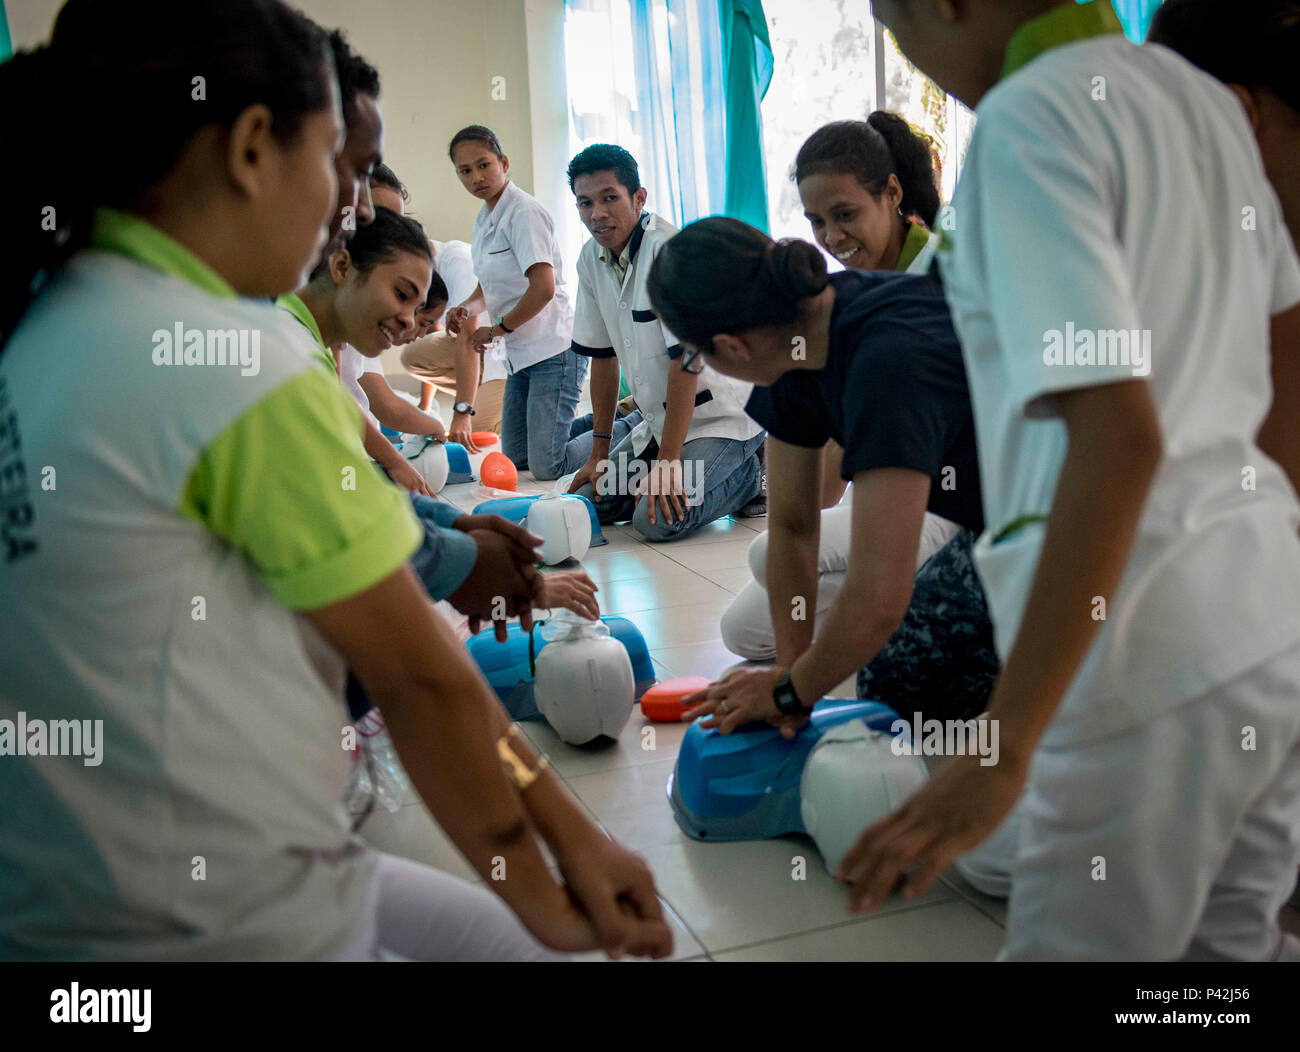 160610-N-QW941-239 DILI, Timor Leste (June 10, 2016) Hospital Corpsman 1st Class Elizabeth Jimenez, a native of Inglewood, California, conducts basic life support training for Timorese students at the International Health Institute during Pacific Partnership 2016. This year marks the sixth time the mission visited Timor Leste since its first visit in 2006. Medical, engineering and various other personnel embarked aboard hospital ship USNS Mercy (T-AH 19) are working side-by-side with partner nation counterparts, exchanging ideas, building best practices and relationships to ensure preparedness Stock Photo